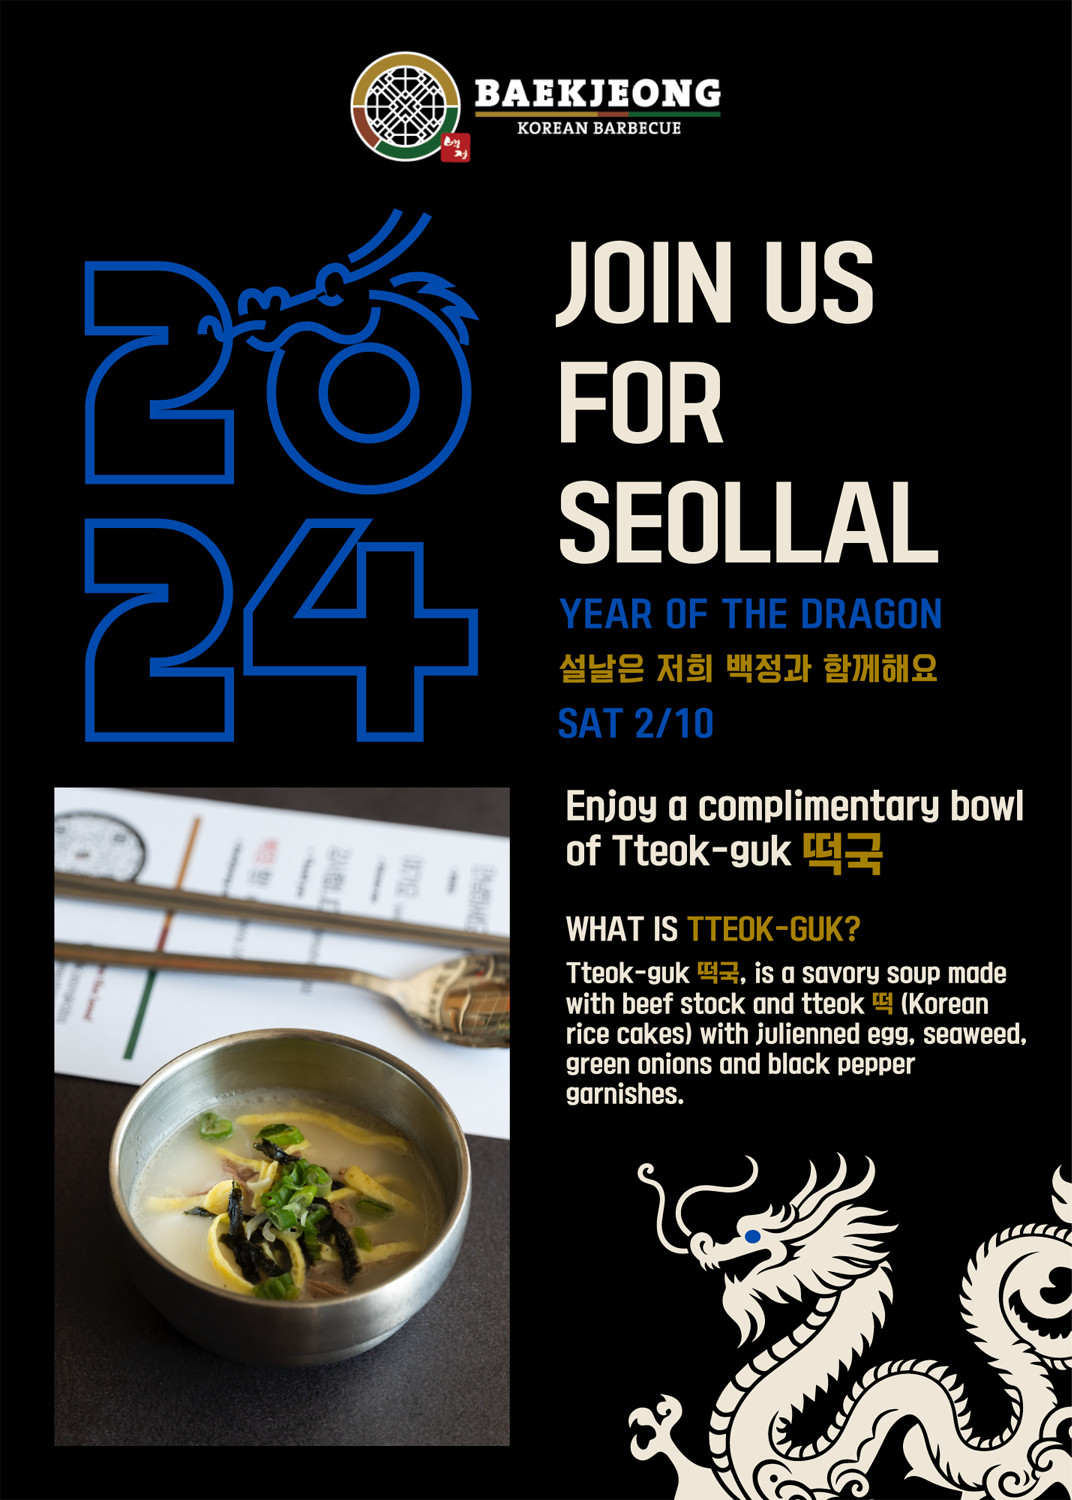 Join us for Seollal, Year of the Dragon, Saturday 2/10. Enjoy a complimentary bowl of Tteok-guk. What is Tteok-guk? Tteok-guk is a savory soup made with beef stock adn tteok (Korean rice cakes) with julienned egg, seaweed, green onions and black pepper garnishes.